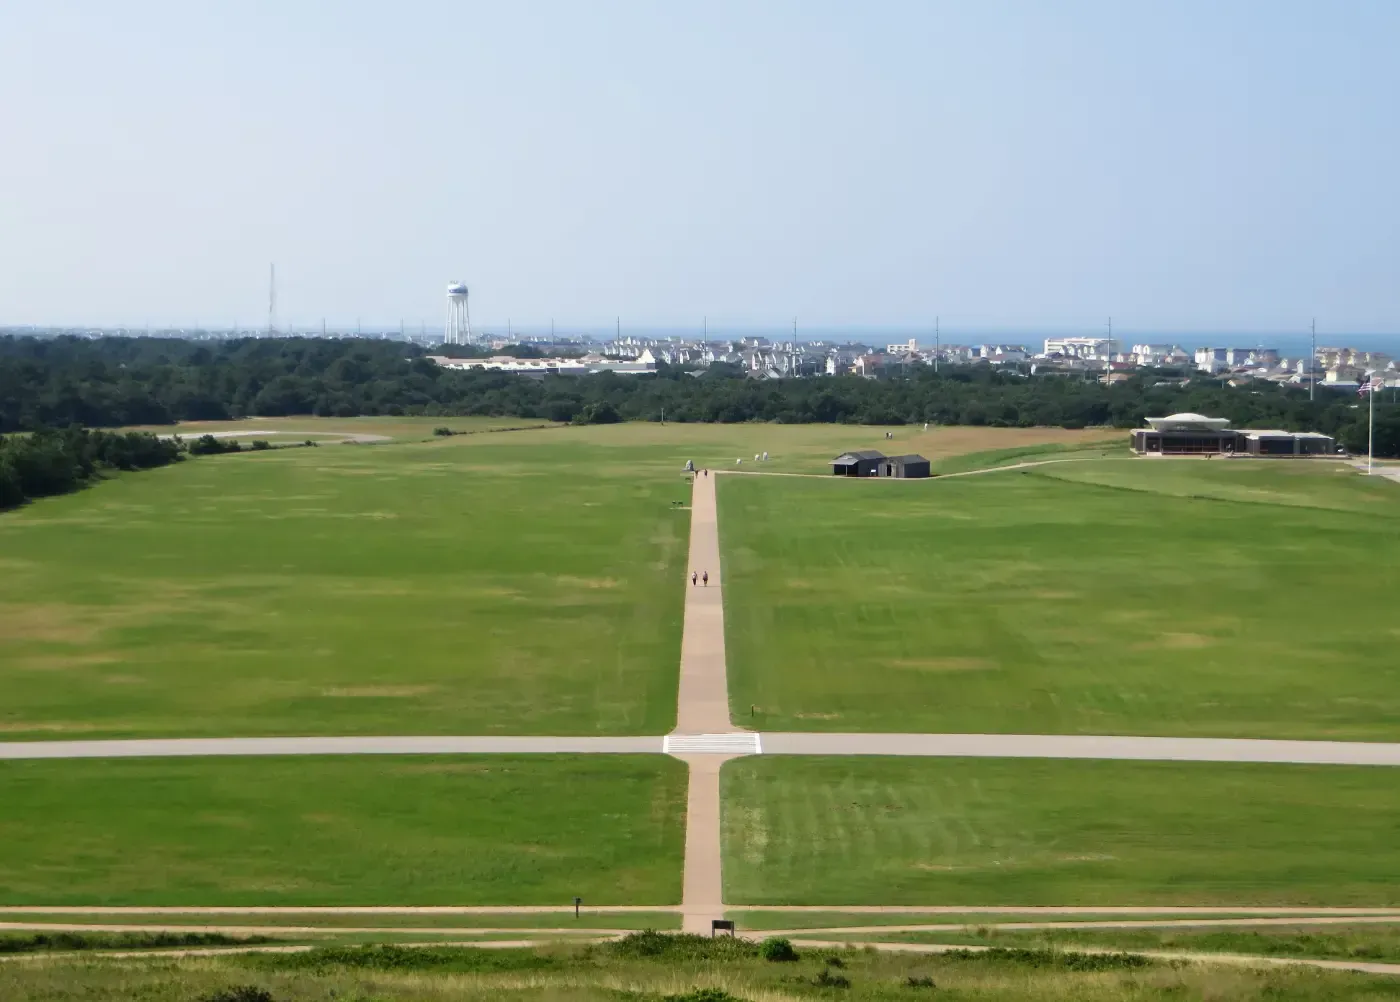 The location of the Wright brothers' first flight today.